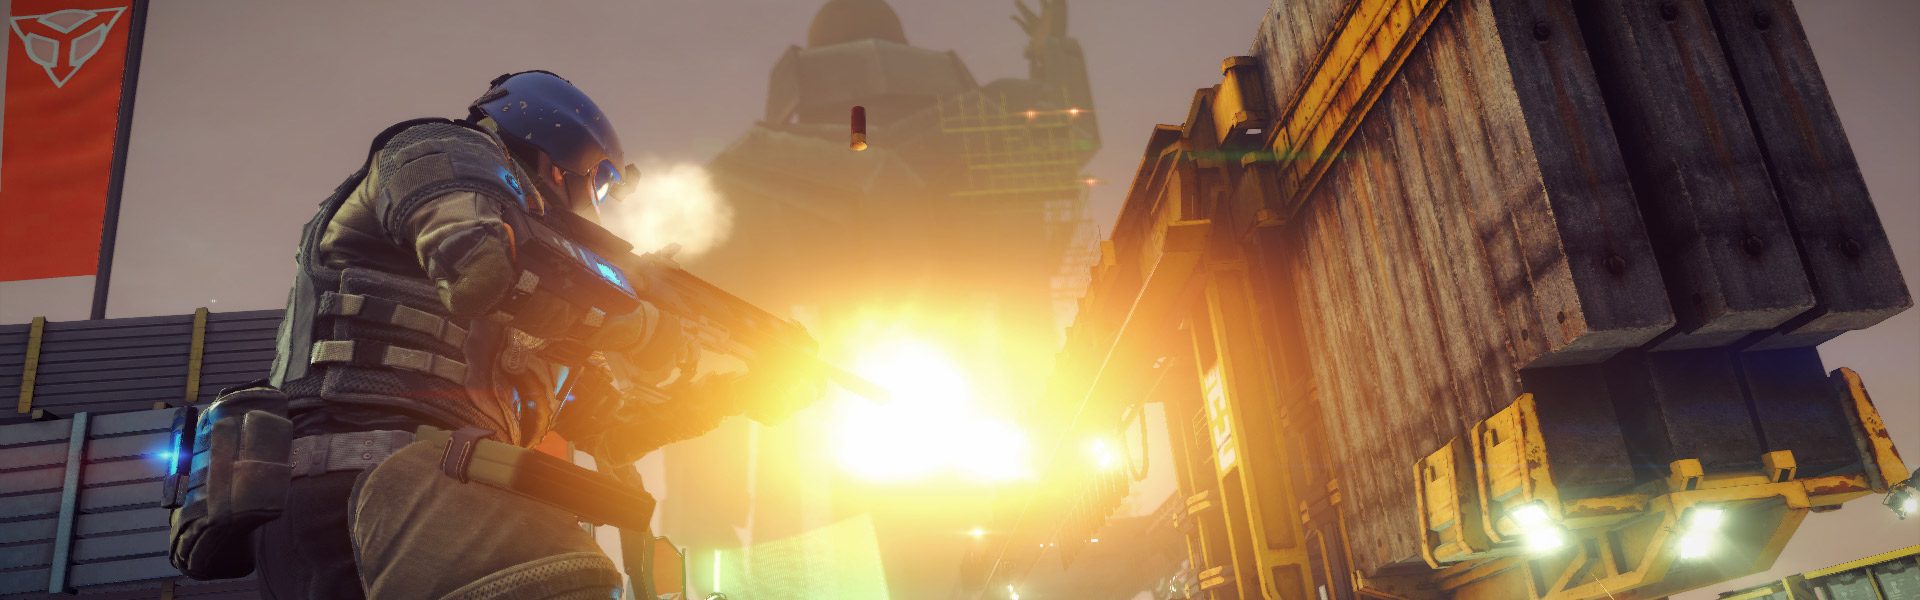 download killzone shadow fall insurgent for free